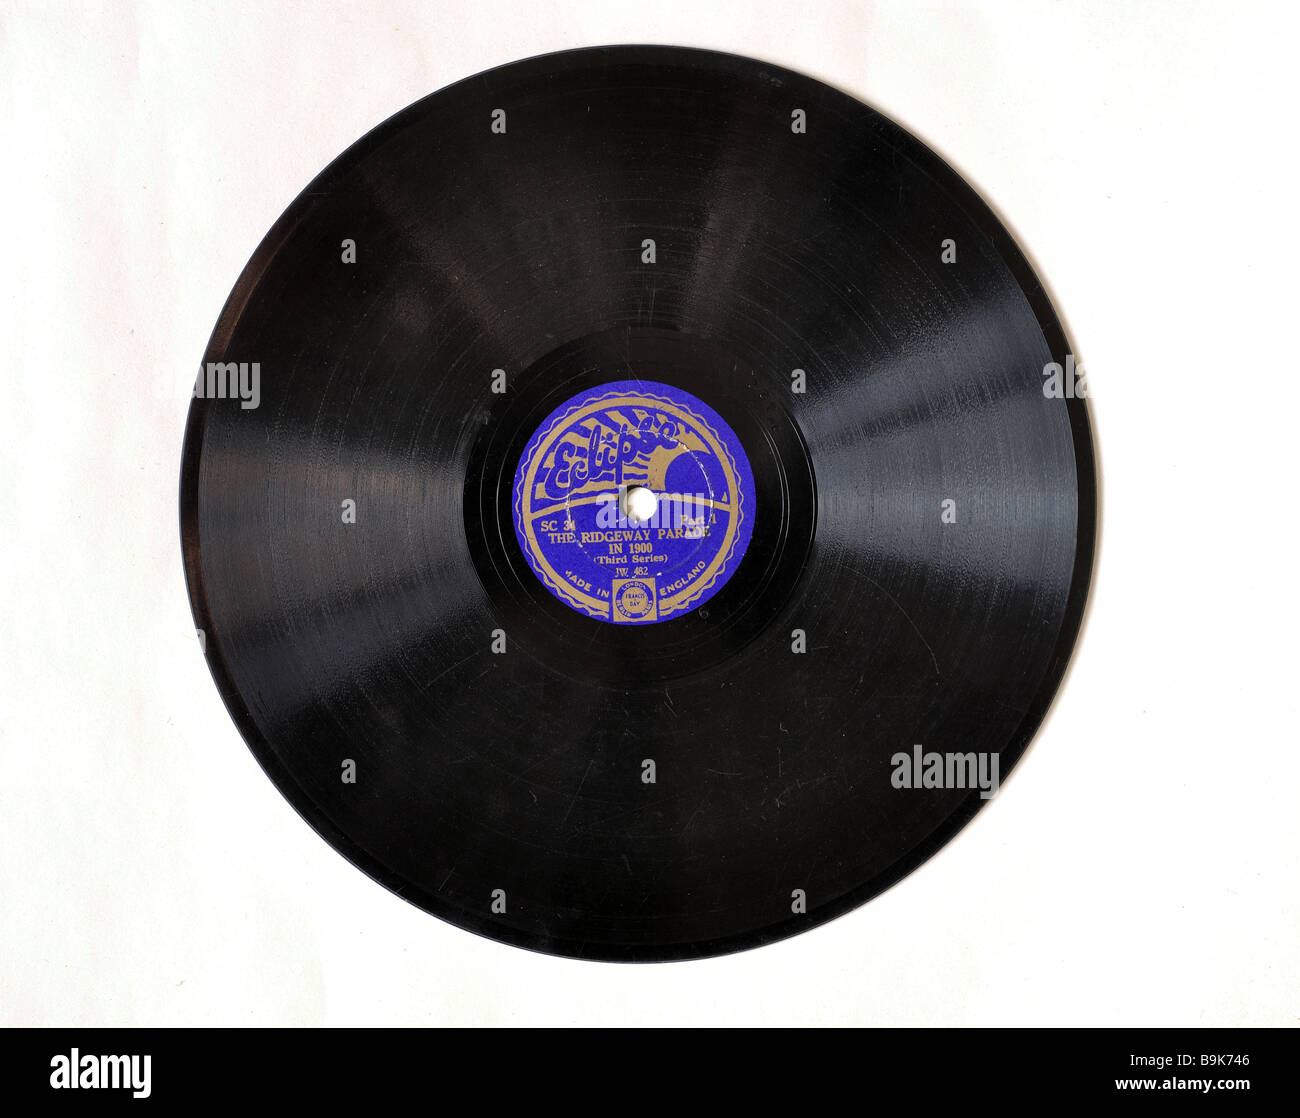 8 inch 78rpm record, 'The Ridgeway Parade in 1900' Stock Photo